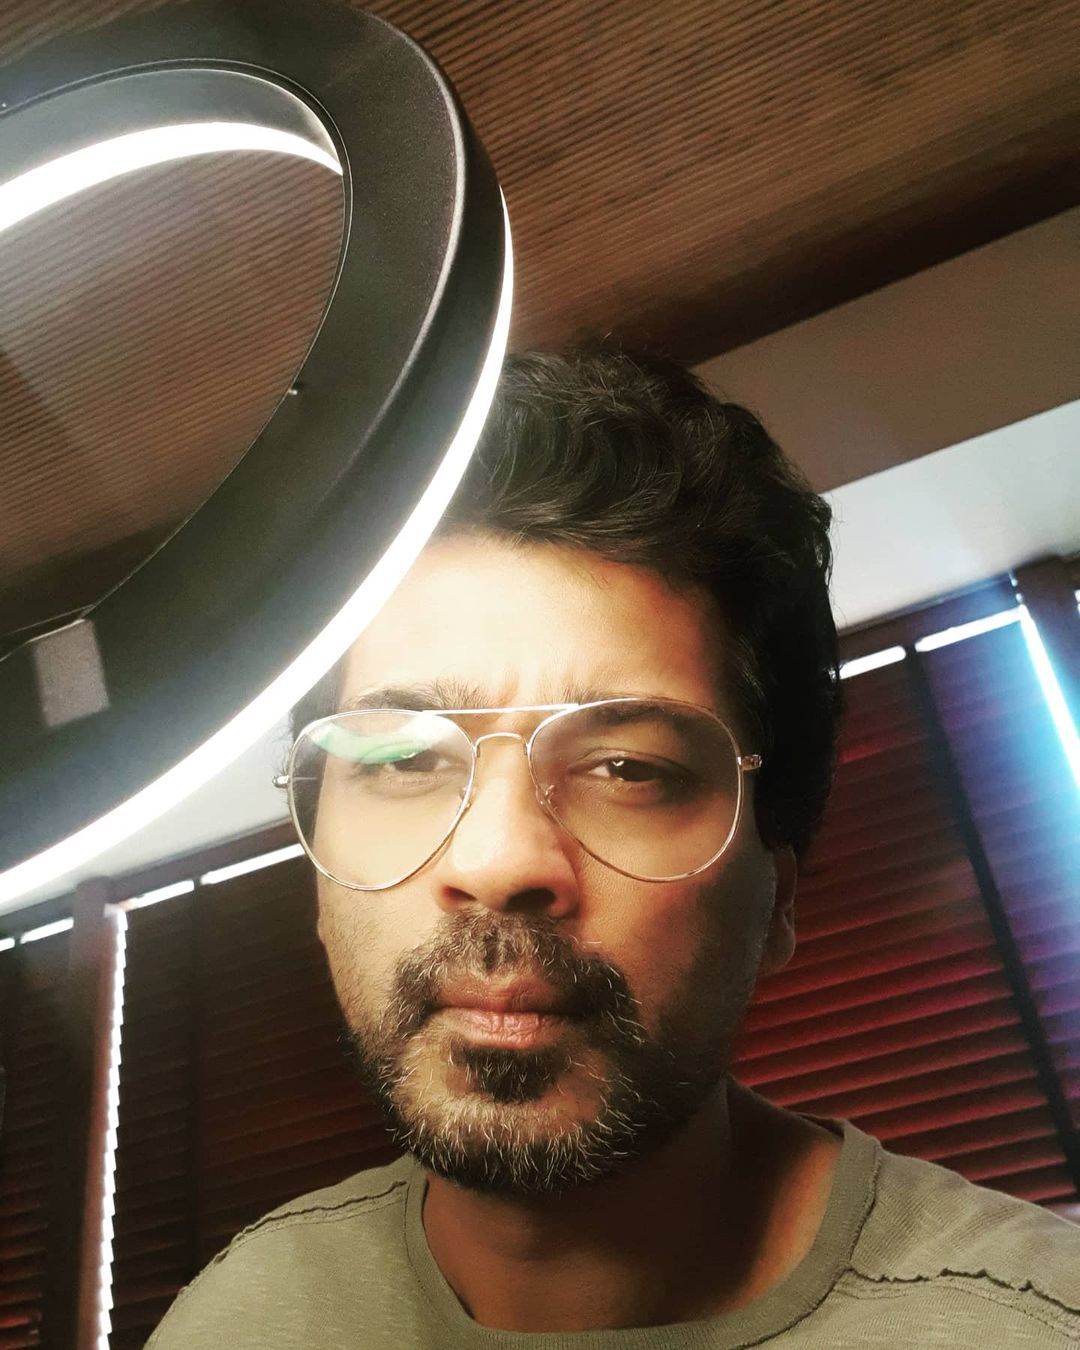 Producer And Actor Nikhil Dwivedi Tests Positive For Covid-19, Quarantined At Home